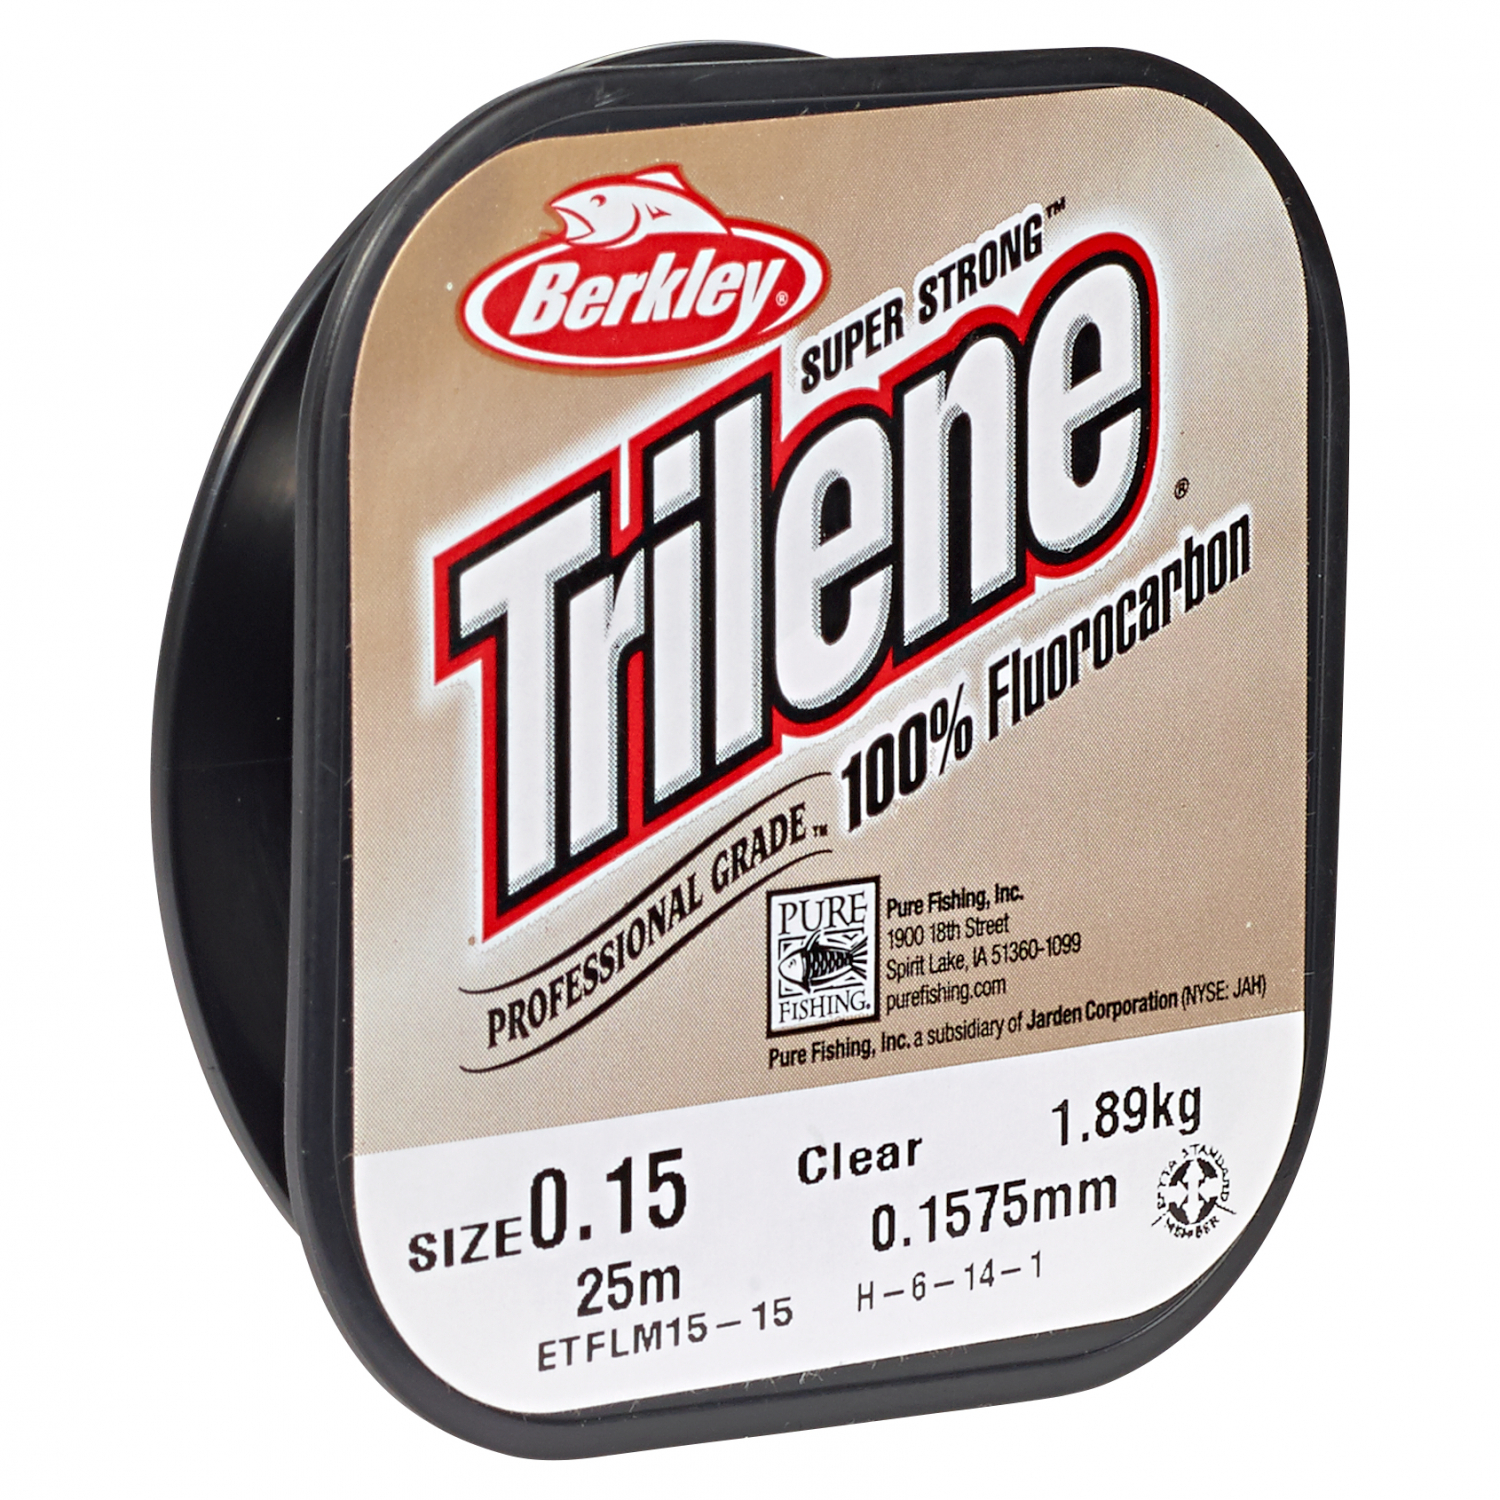 Berkley Trace Line Trilene Fluorocarbon Leader (clear, 25 m) at low prices